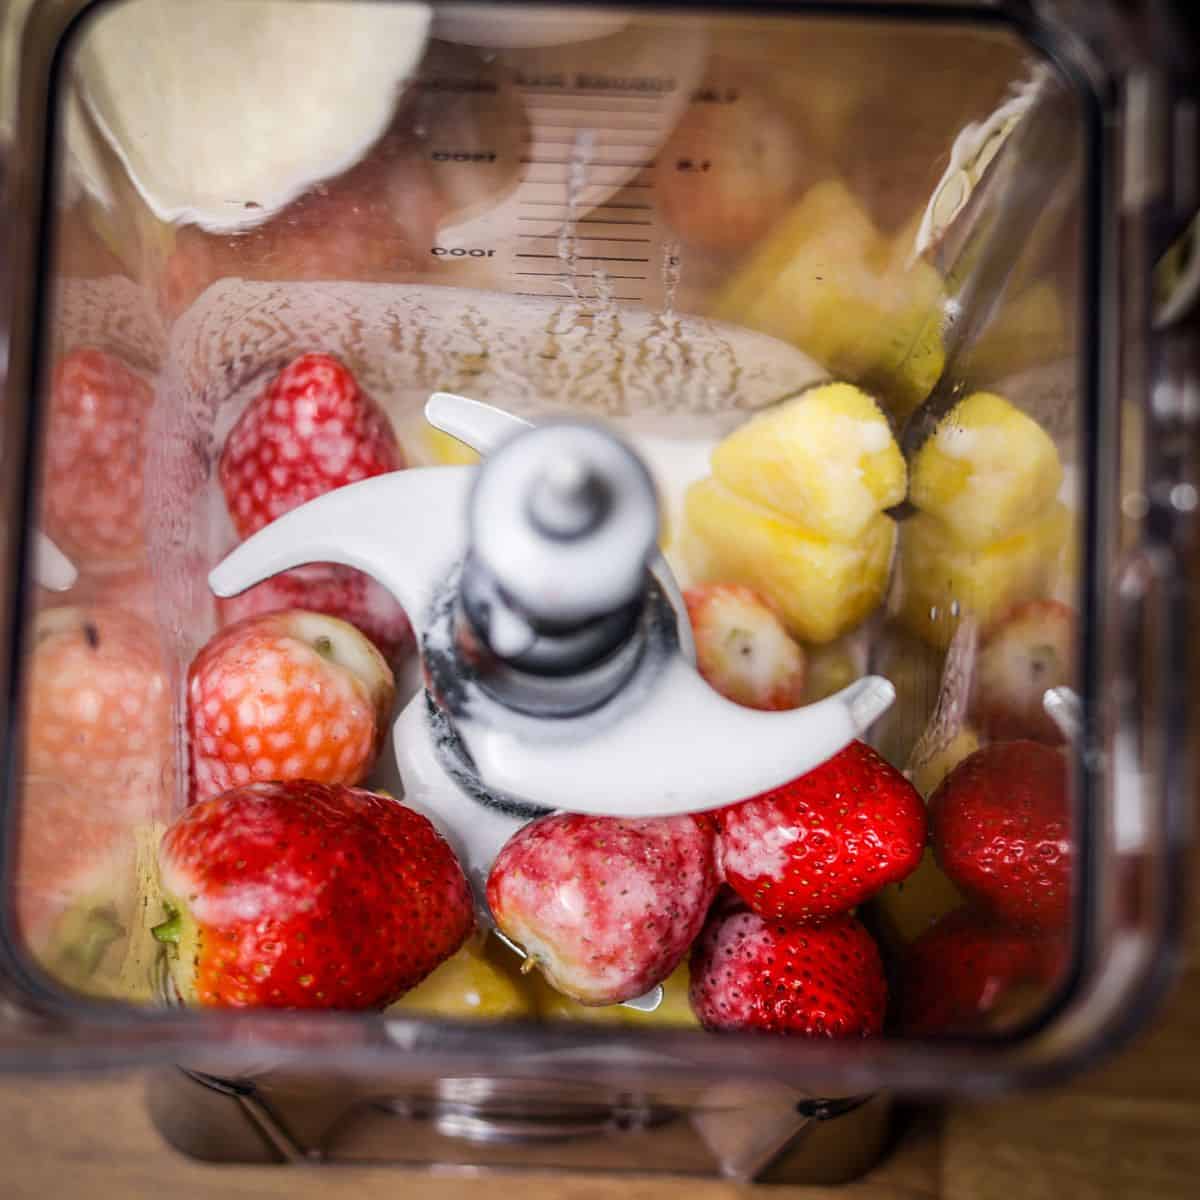 A blender from above filled with fresh whole strawberries and chunks of pineapple, pre-blend for a smoothie.